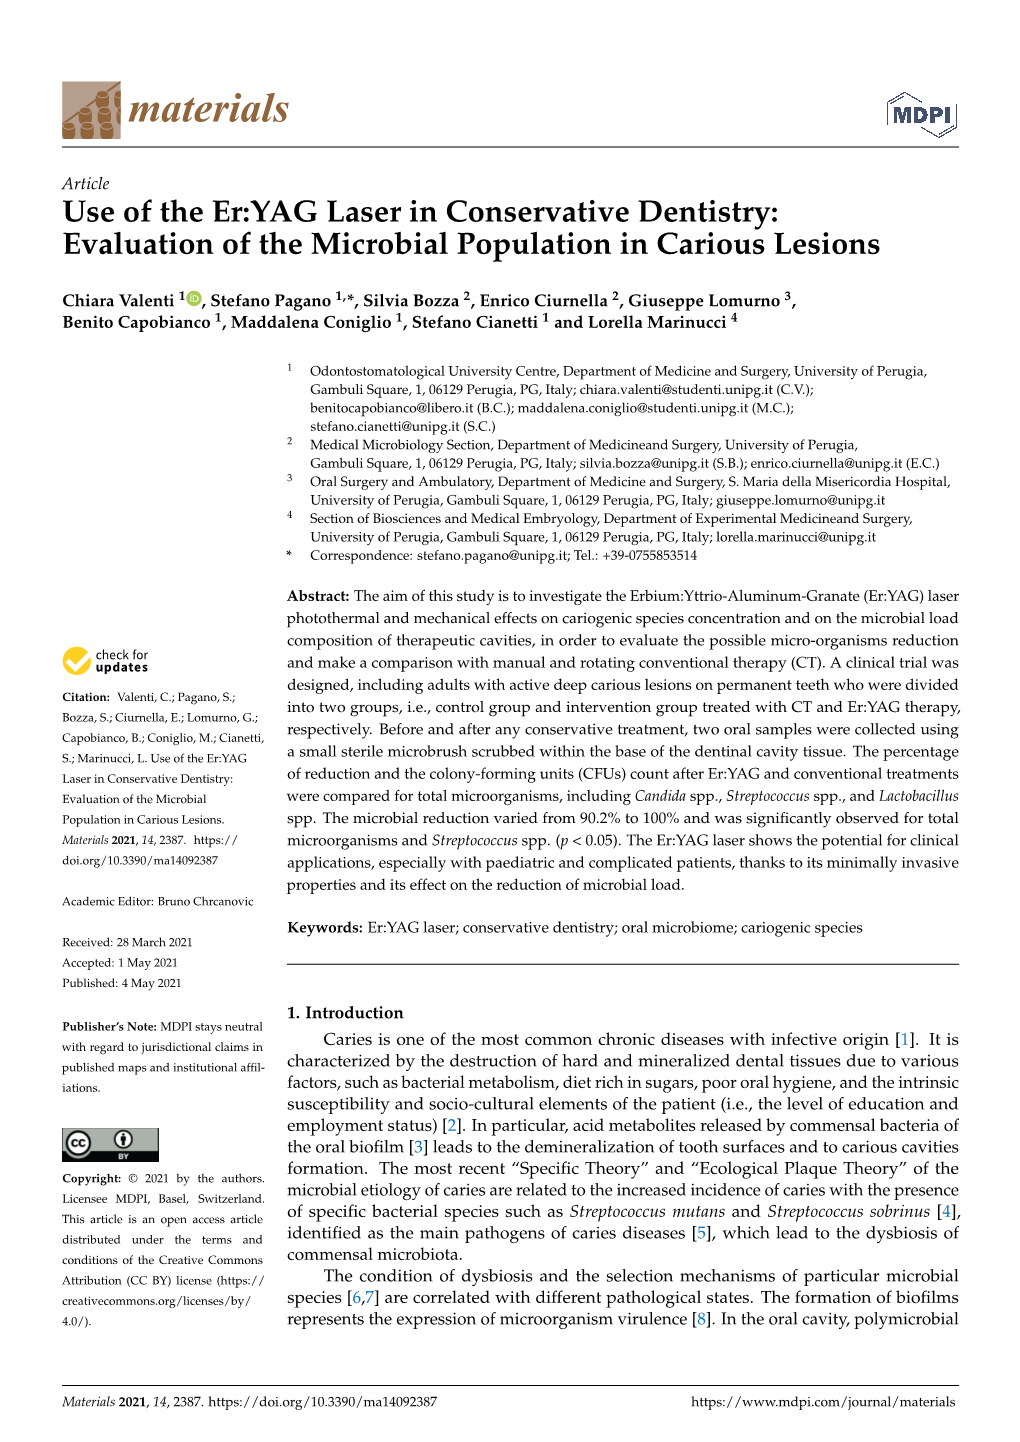 Use of the Er:YAG Laser in Conservative Dentistry: Evaluation of the Microbial Population in Carious Lesions